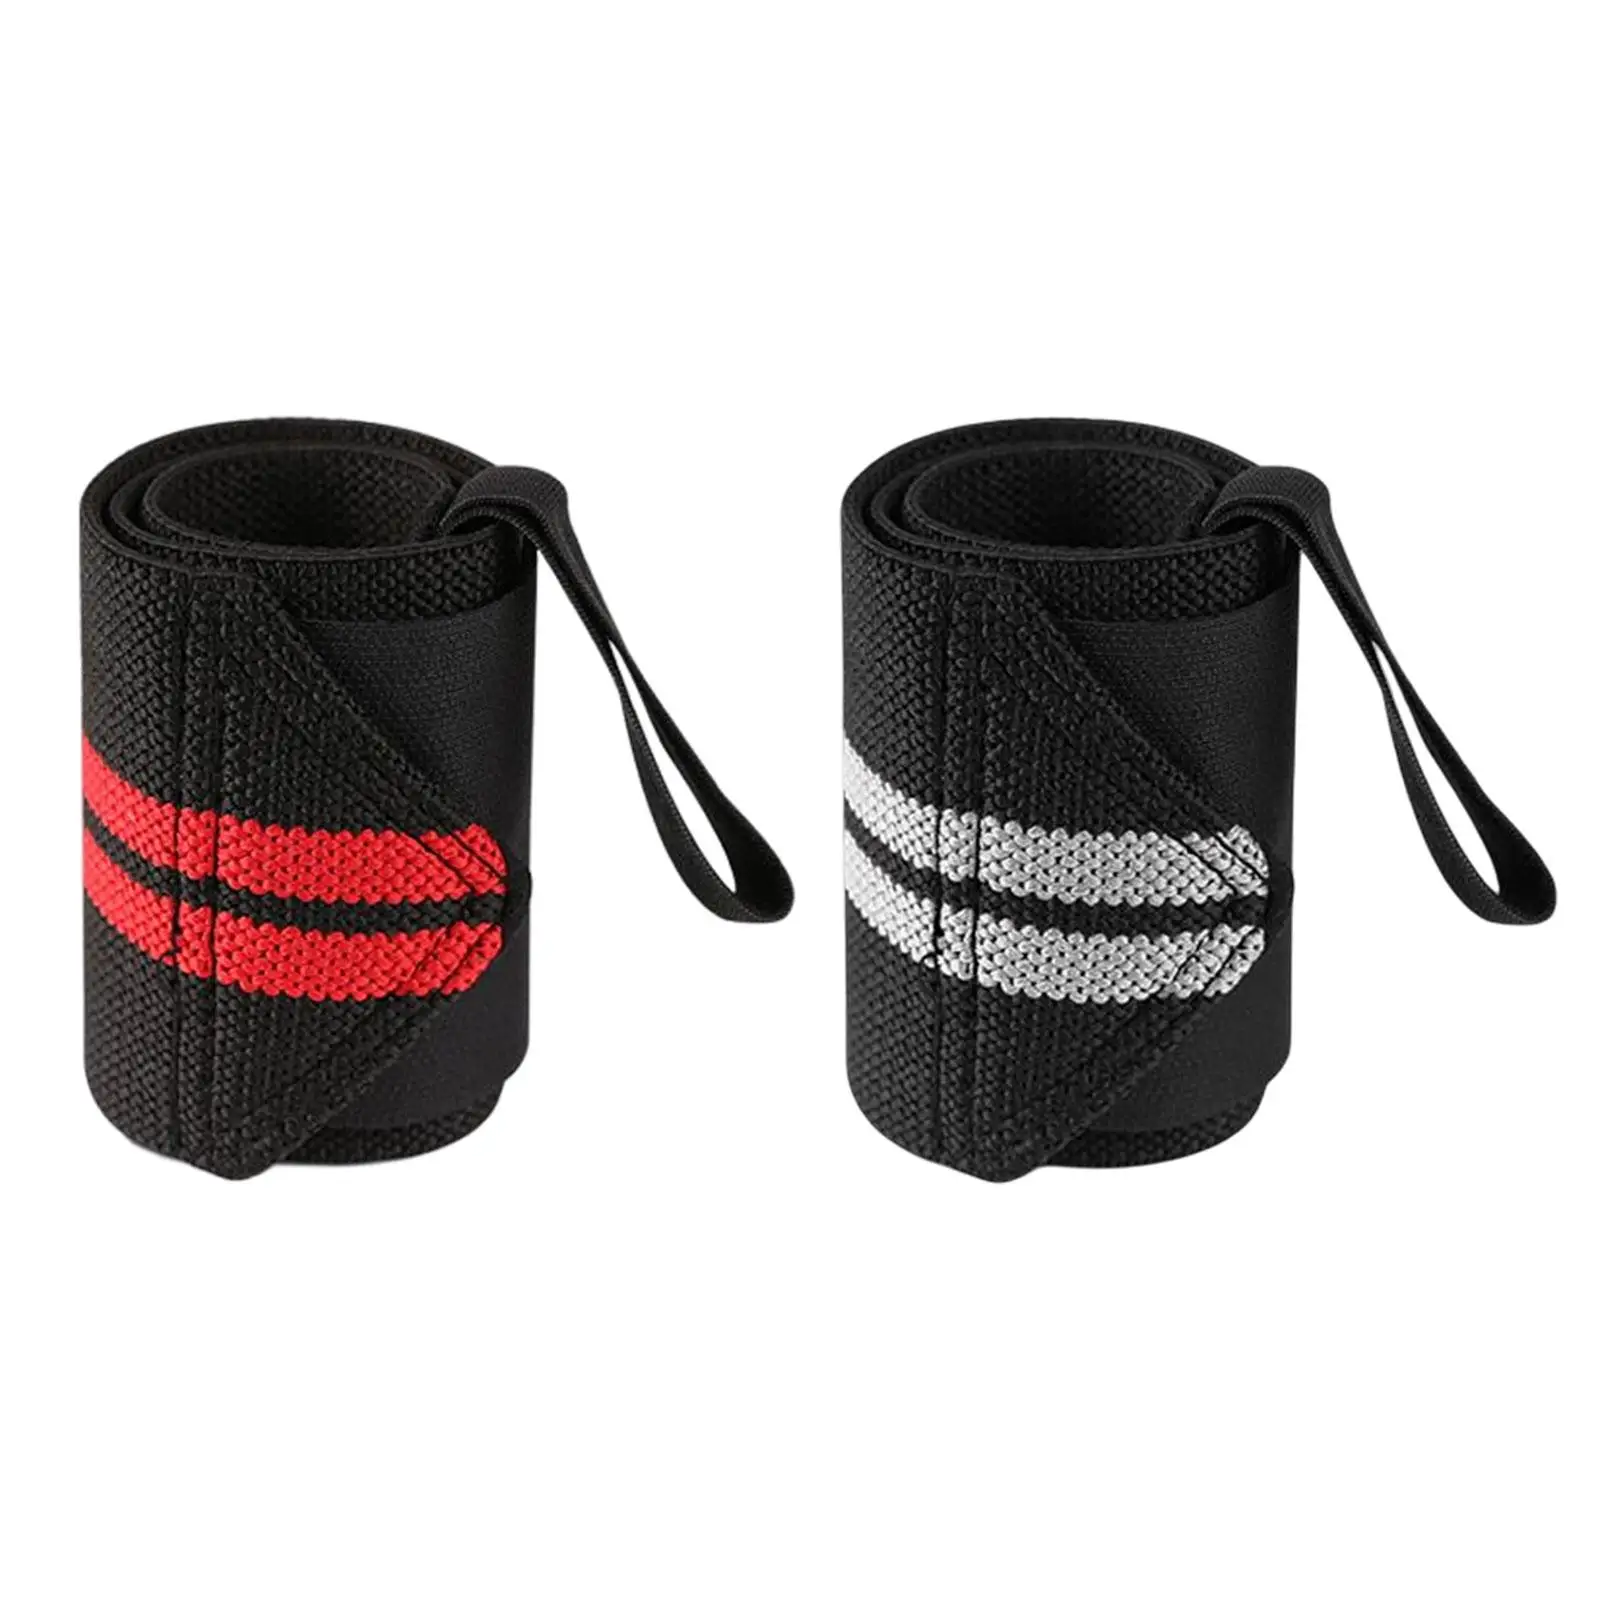 

Gym Wrist Wraps Durable Comfortable with Thumb Loop Wrist Bands for Powerlifting Strength Training Fitness Working Out